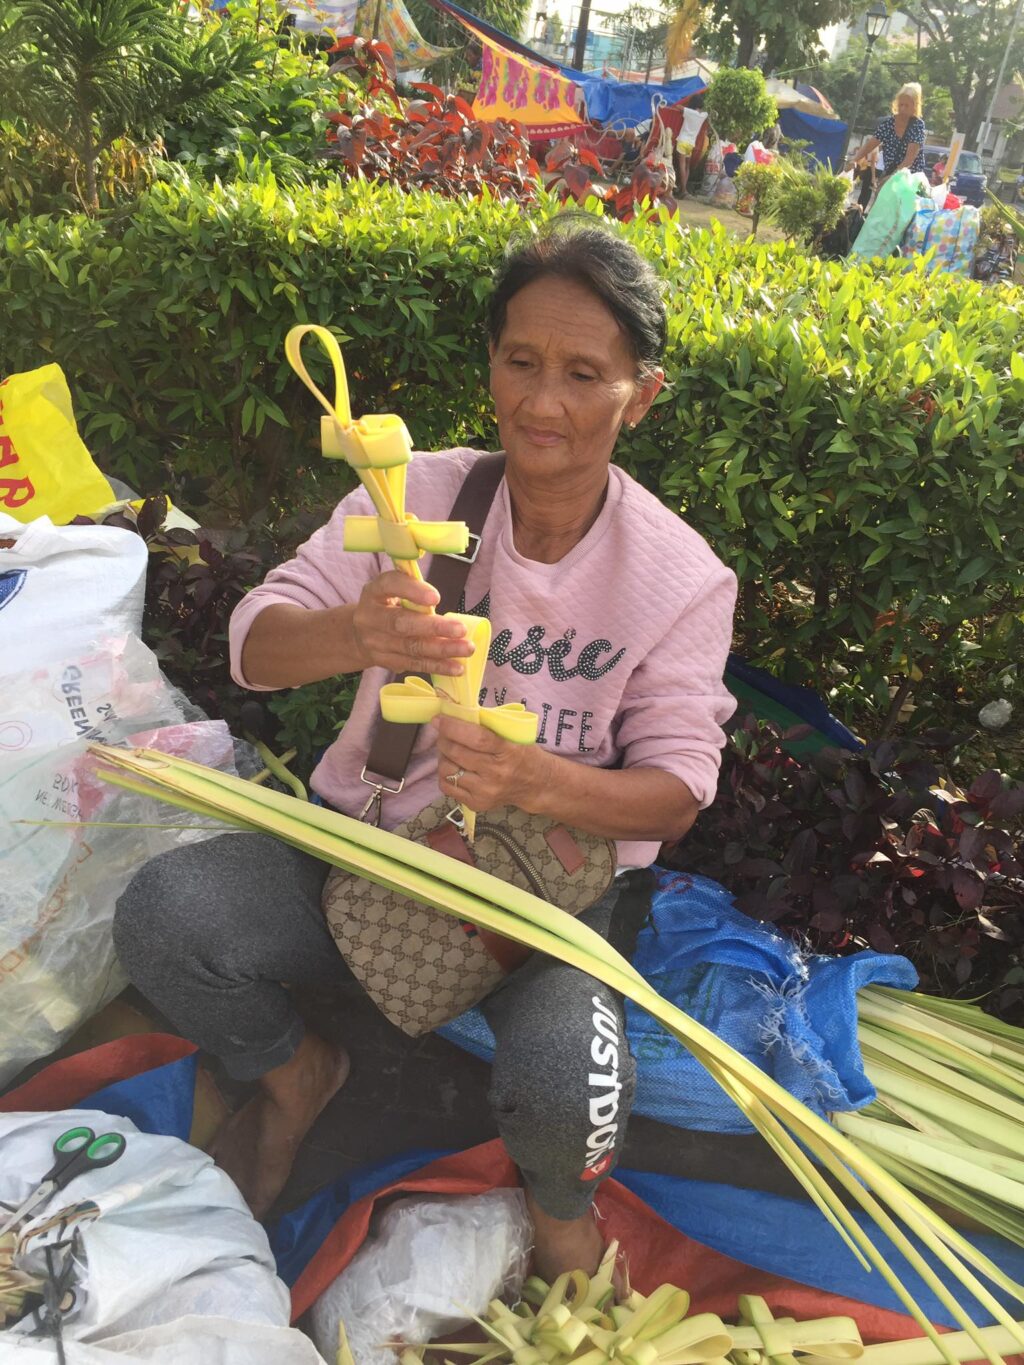 Vendors look forward to improved sales this Palm Sunday. Emily Waper, 62, of Carcar City also hopes to have better sales, which will be enough to cover her expenses to get here to sell her palm fronds. | Doris Bongcac